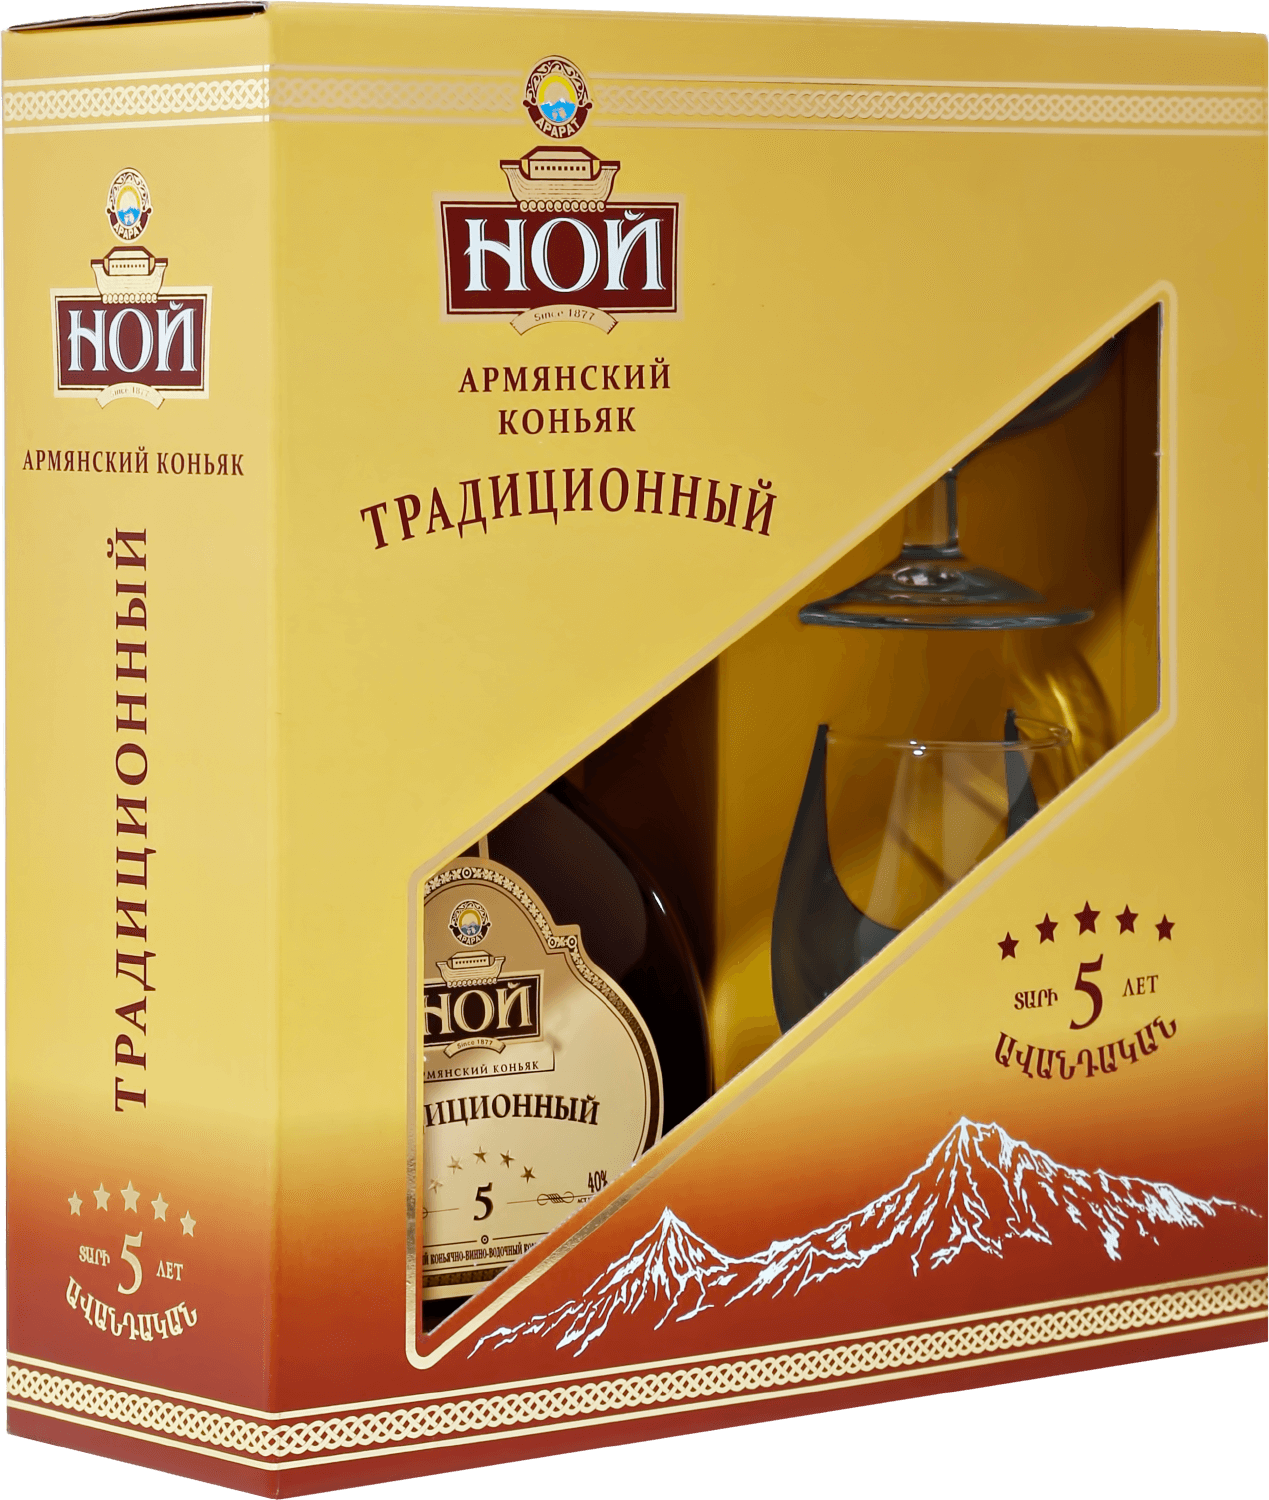 metaxa 7 stars gift box with two glasses Noy Tradicionniy Armenian Brandy 5 y.o. in gift box with two glasses